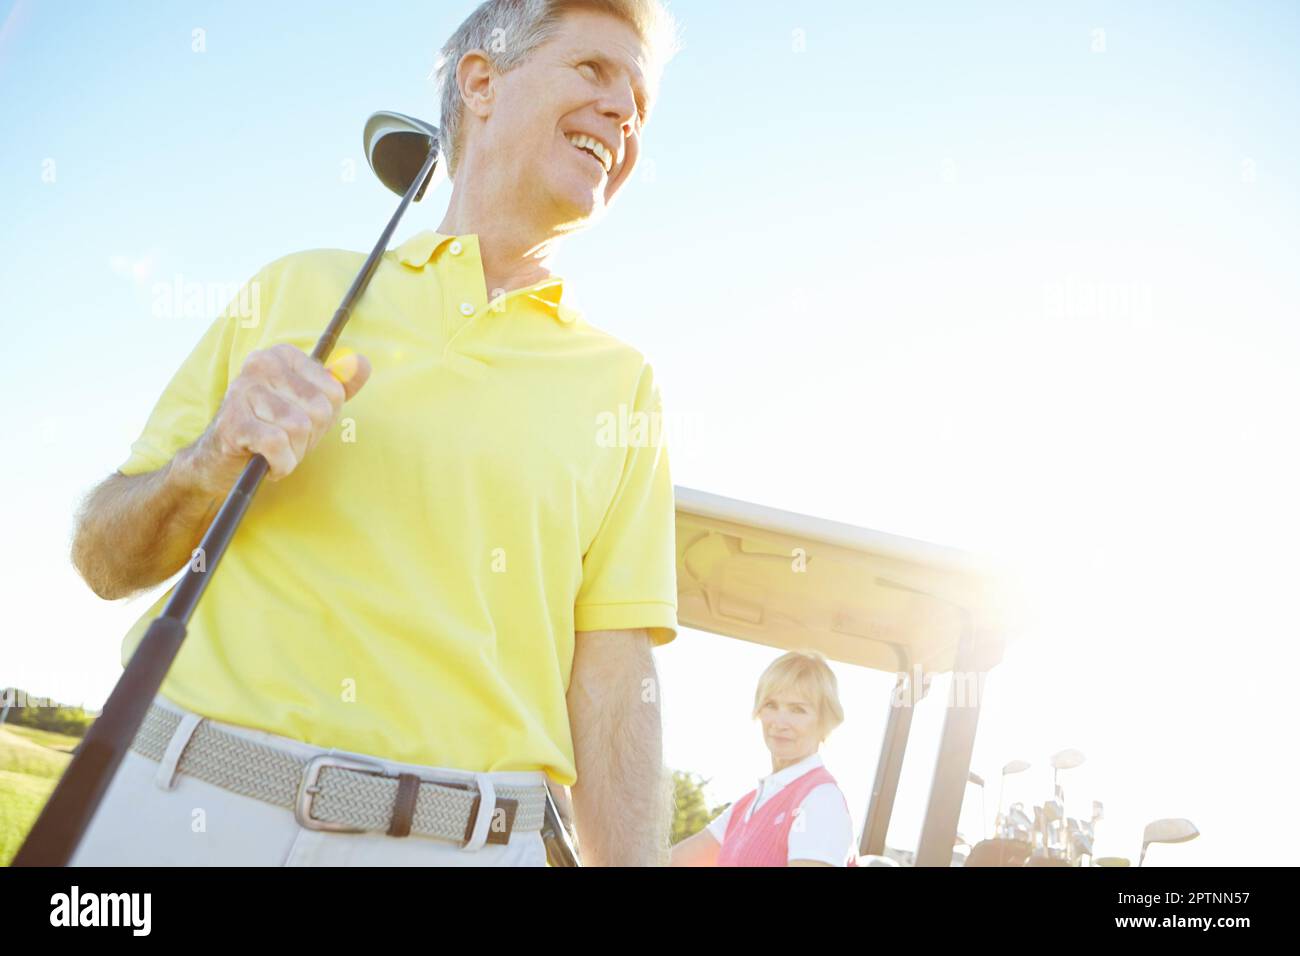 Visions of improving his handicap. Low angle shot of a handsome older golfer standing in front of a golf cart with his golfing buddy behind the wheel. Stock Photo